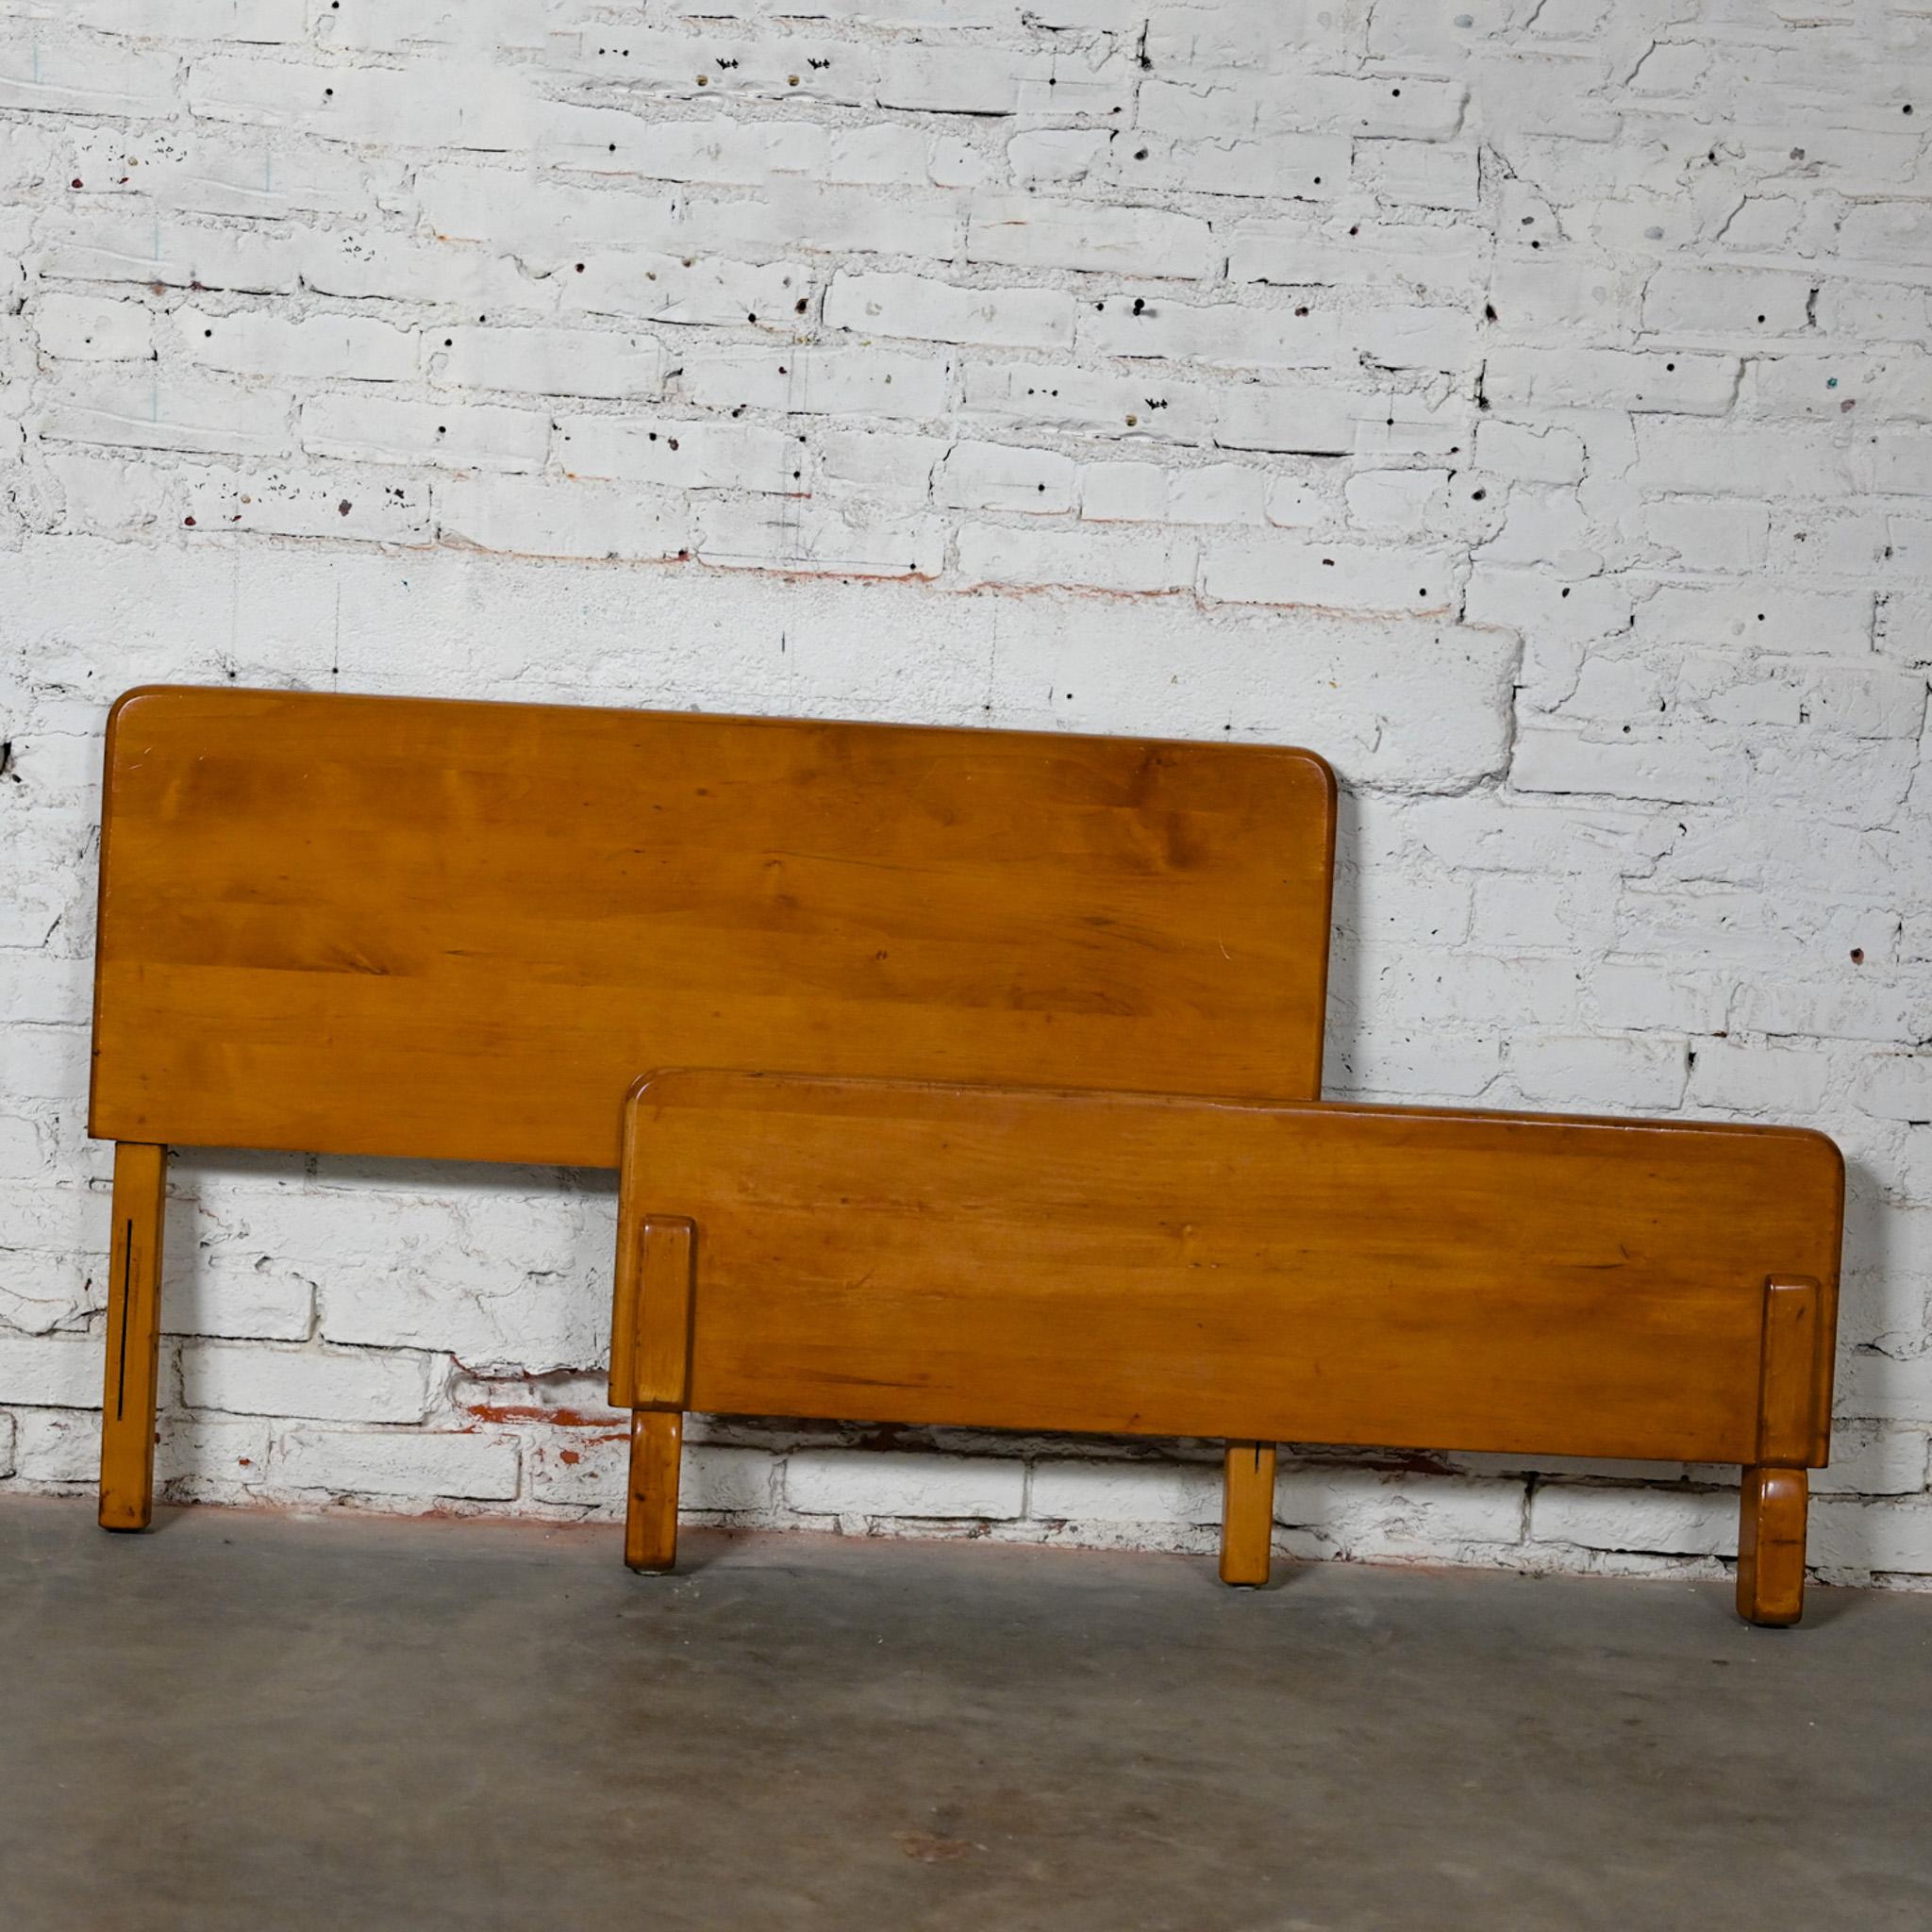 Early-Mid-20th Century Art Moderne Maple Twin Bed Headboard & Footboard  For Sale 3